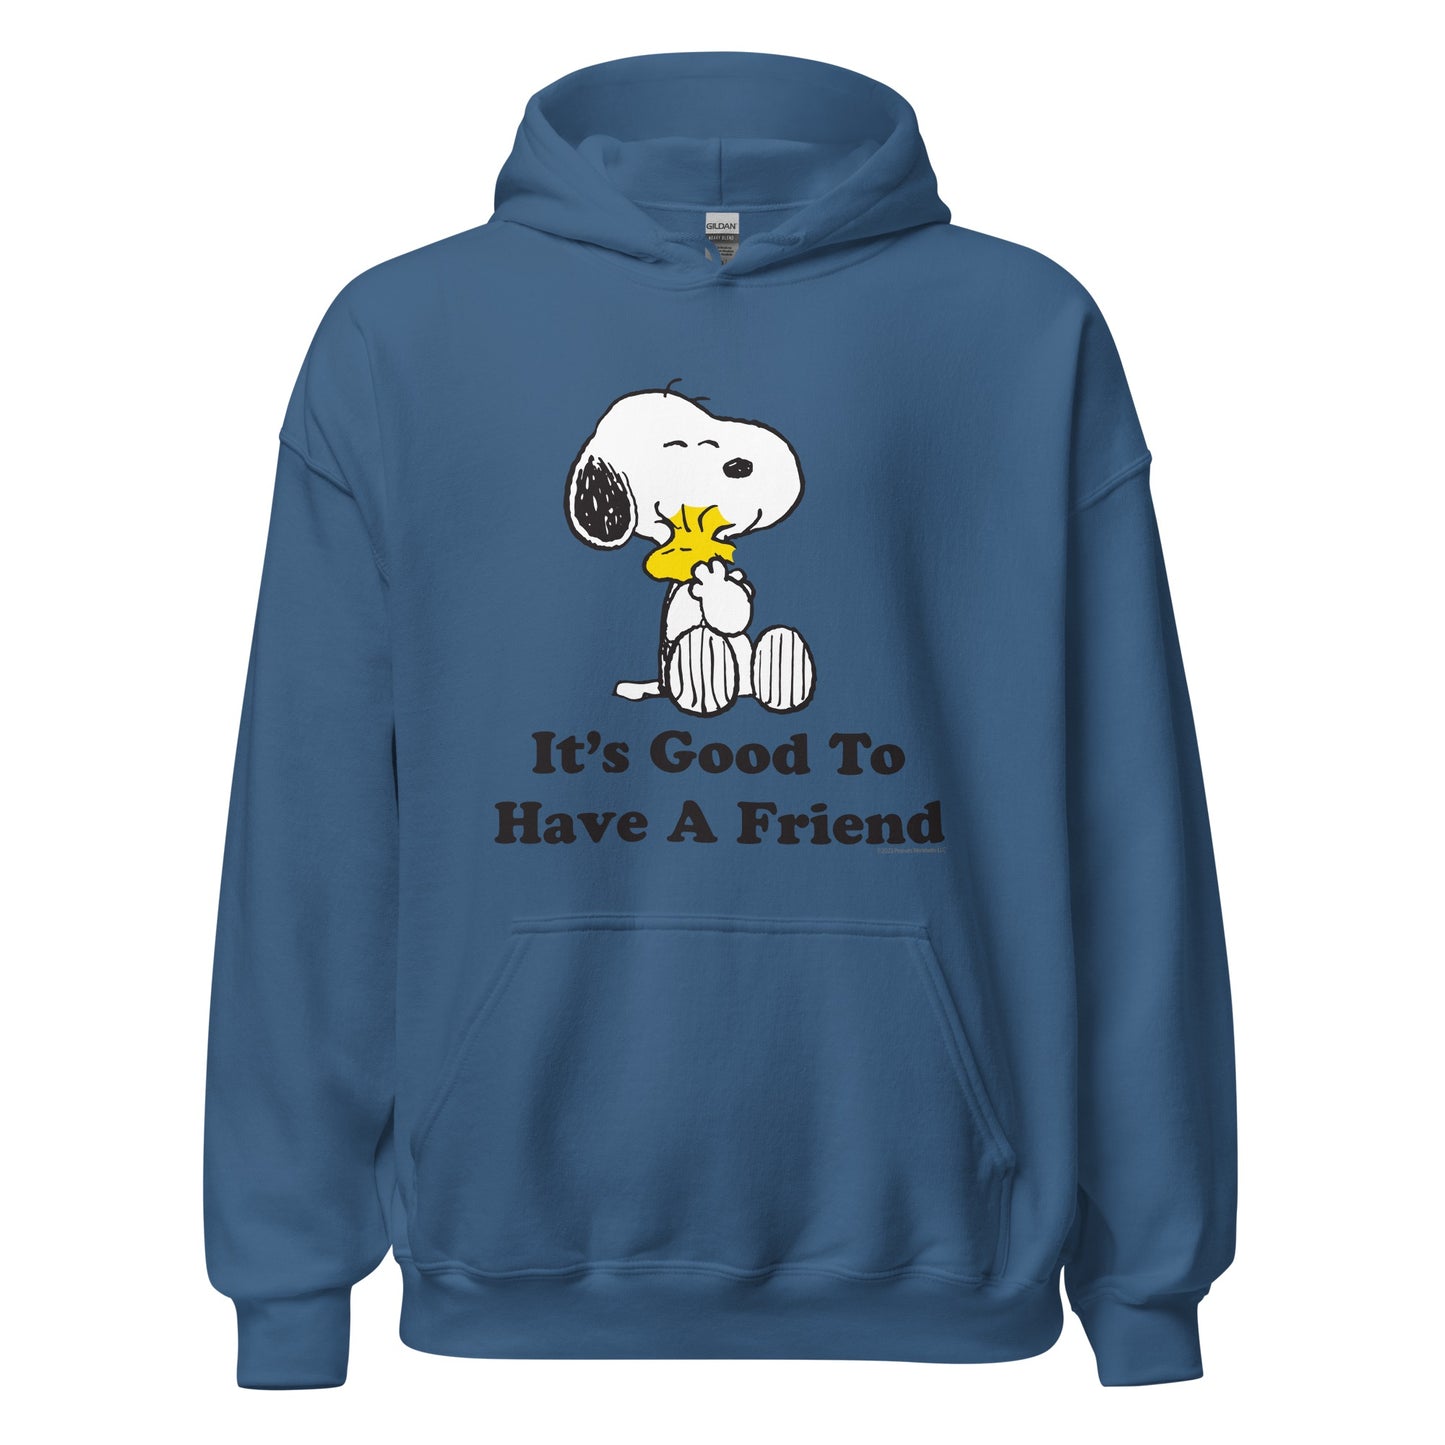 It's Good To Have A Friend Adult Hoodie